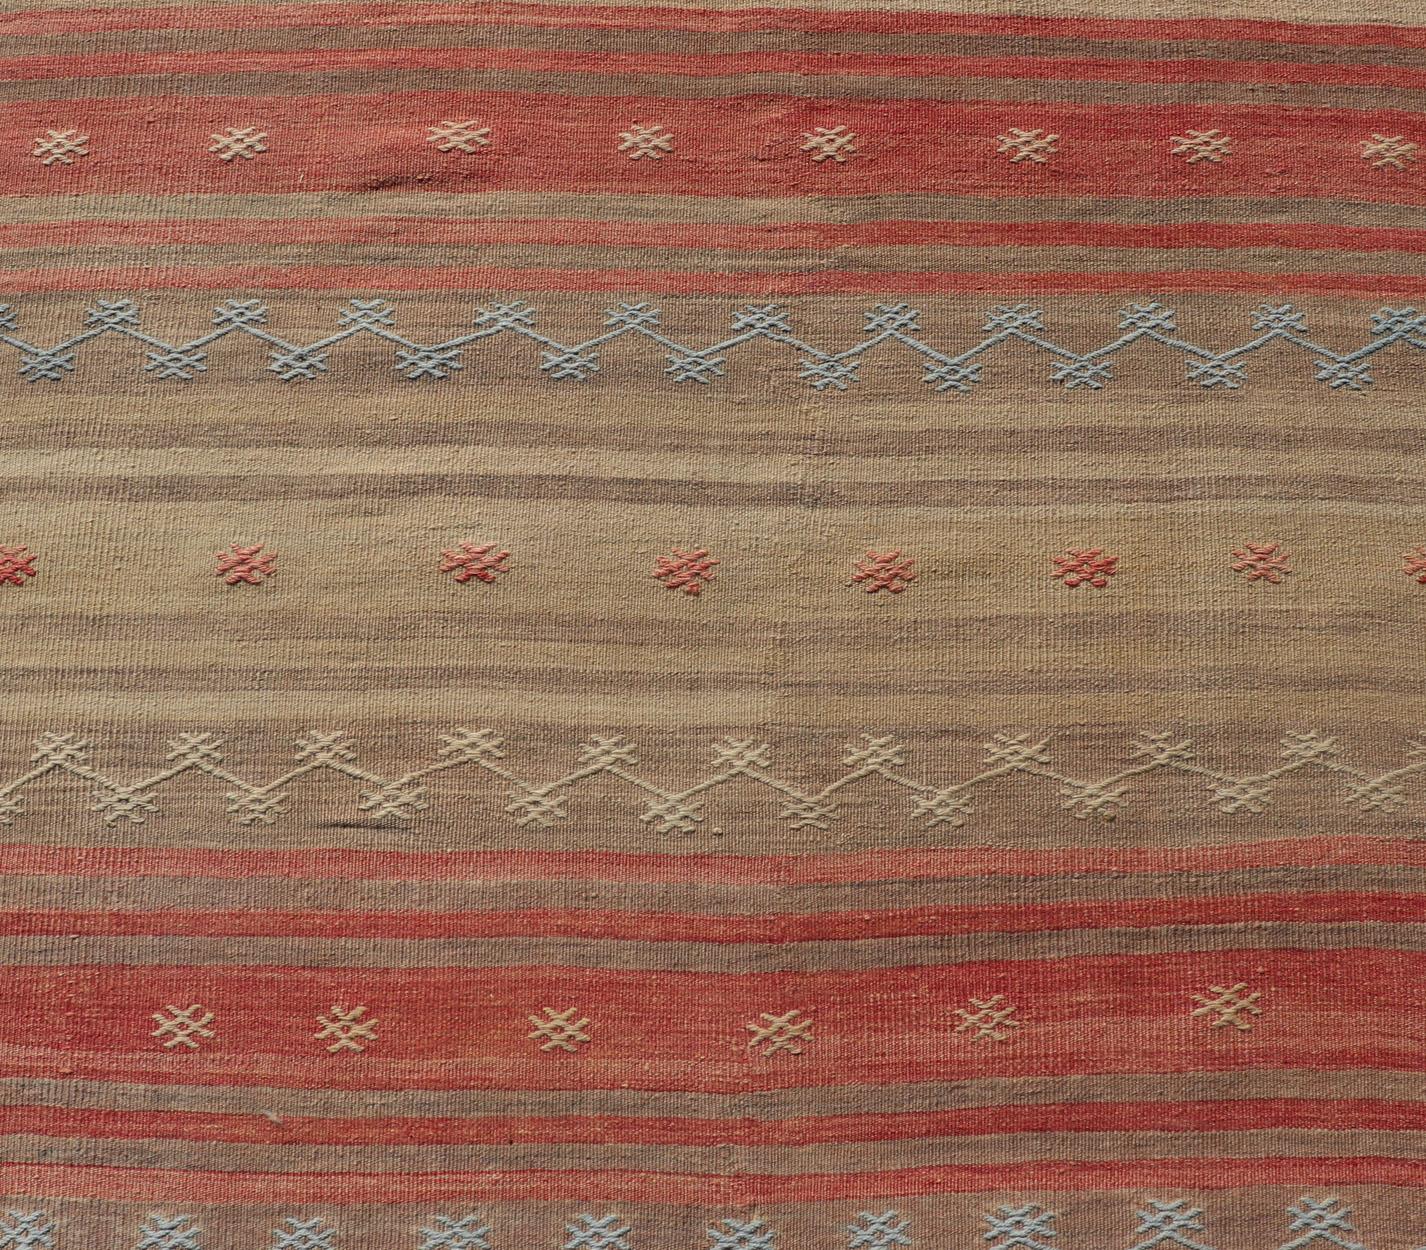 Vintage Turkish Kilim with Stripes in Blue, Tan, Brown, Cream and Orange For Sale 2